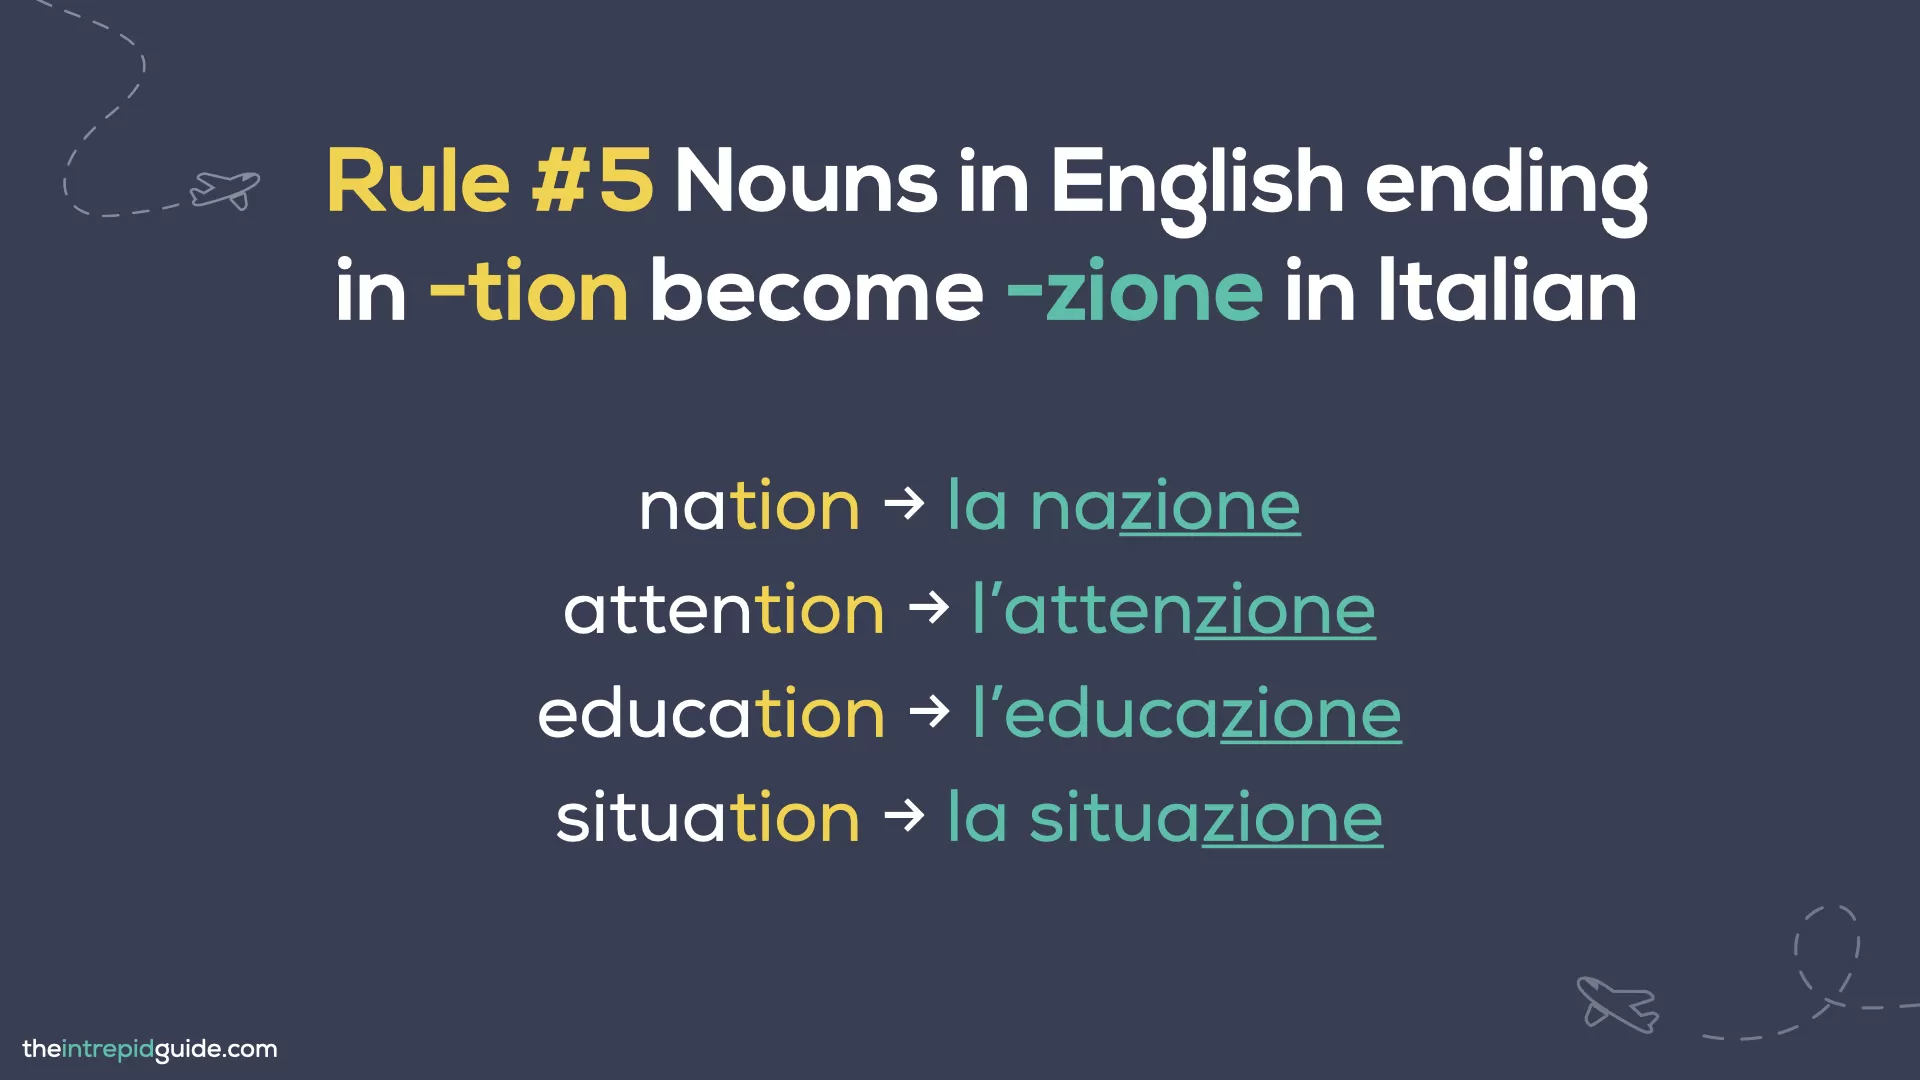 Italian cognates and loan words - Rule 5 - Nouns in English ending in -tion become -zione in Italian